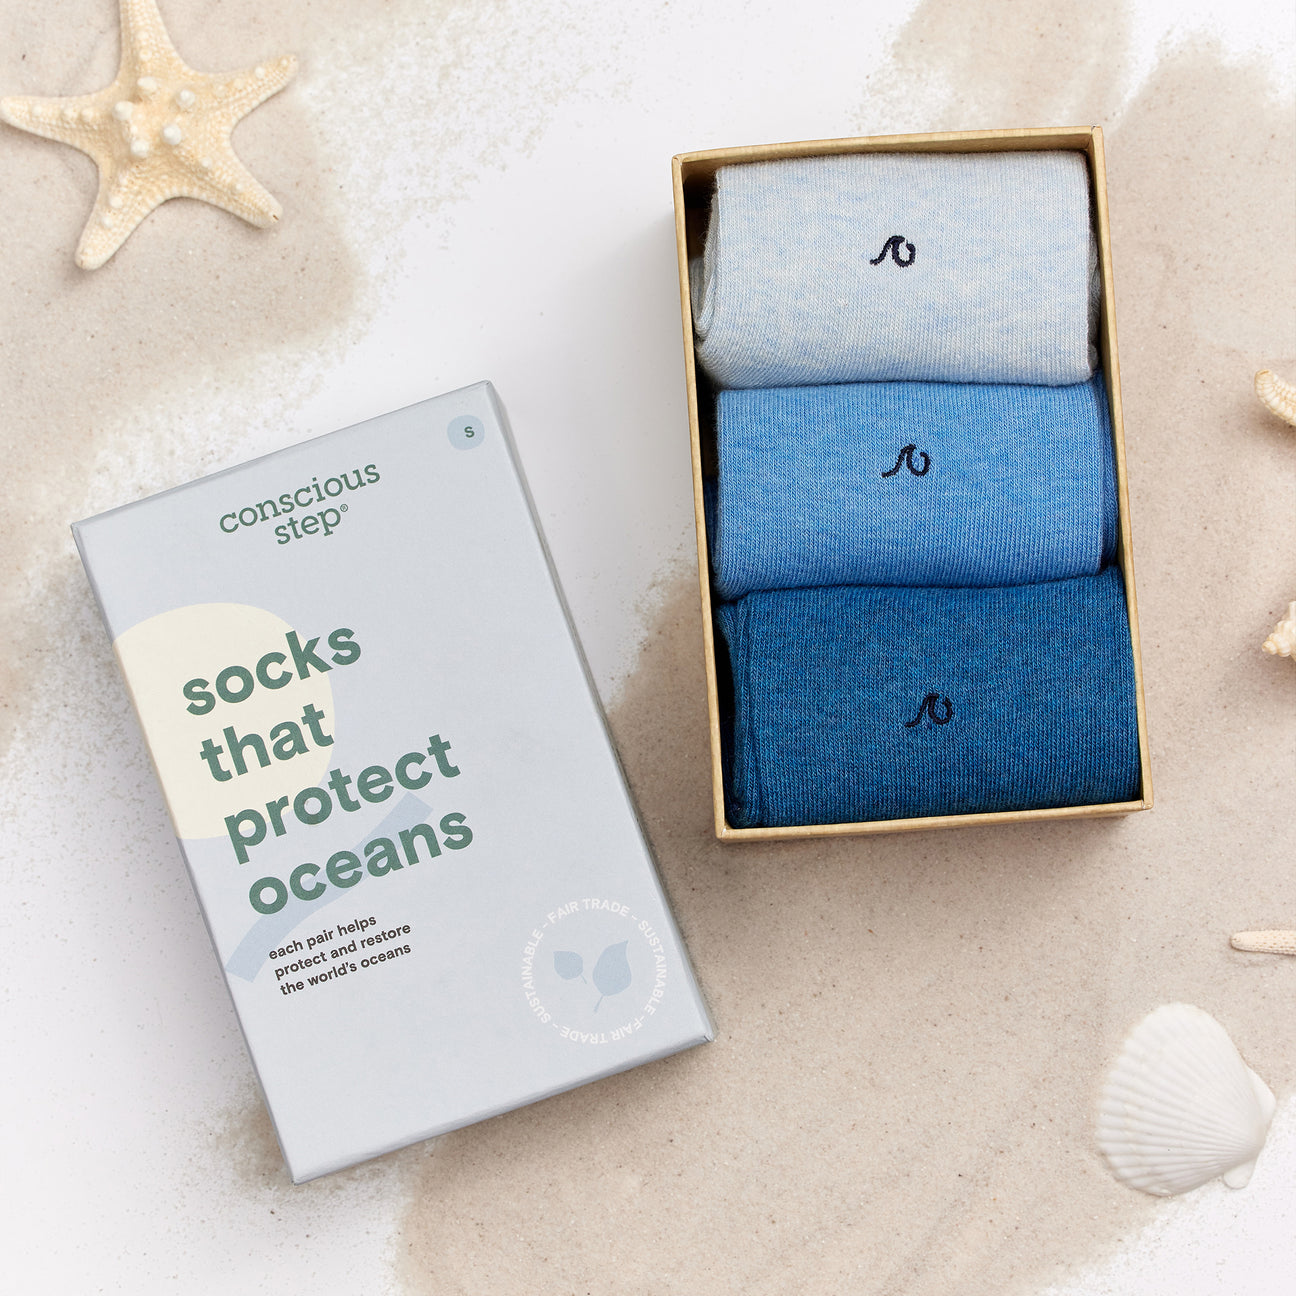 Socks That Protect Oceans from Conscious Step